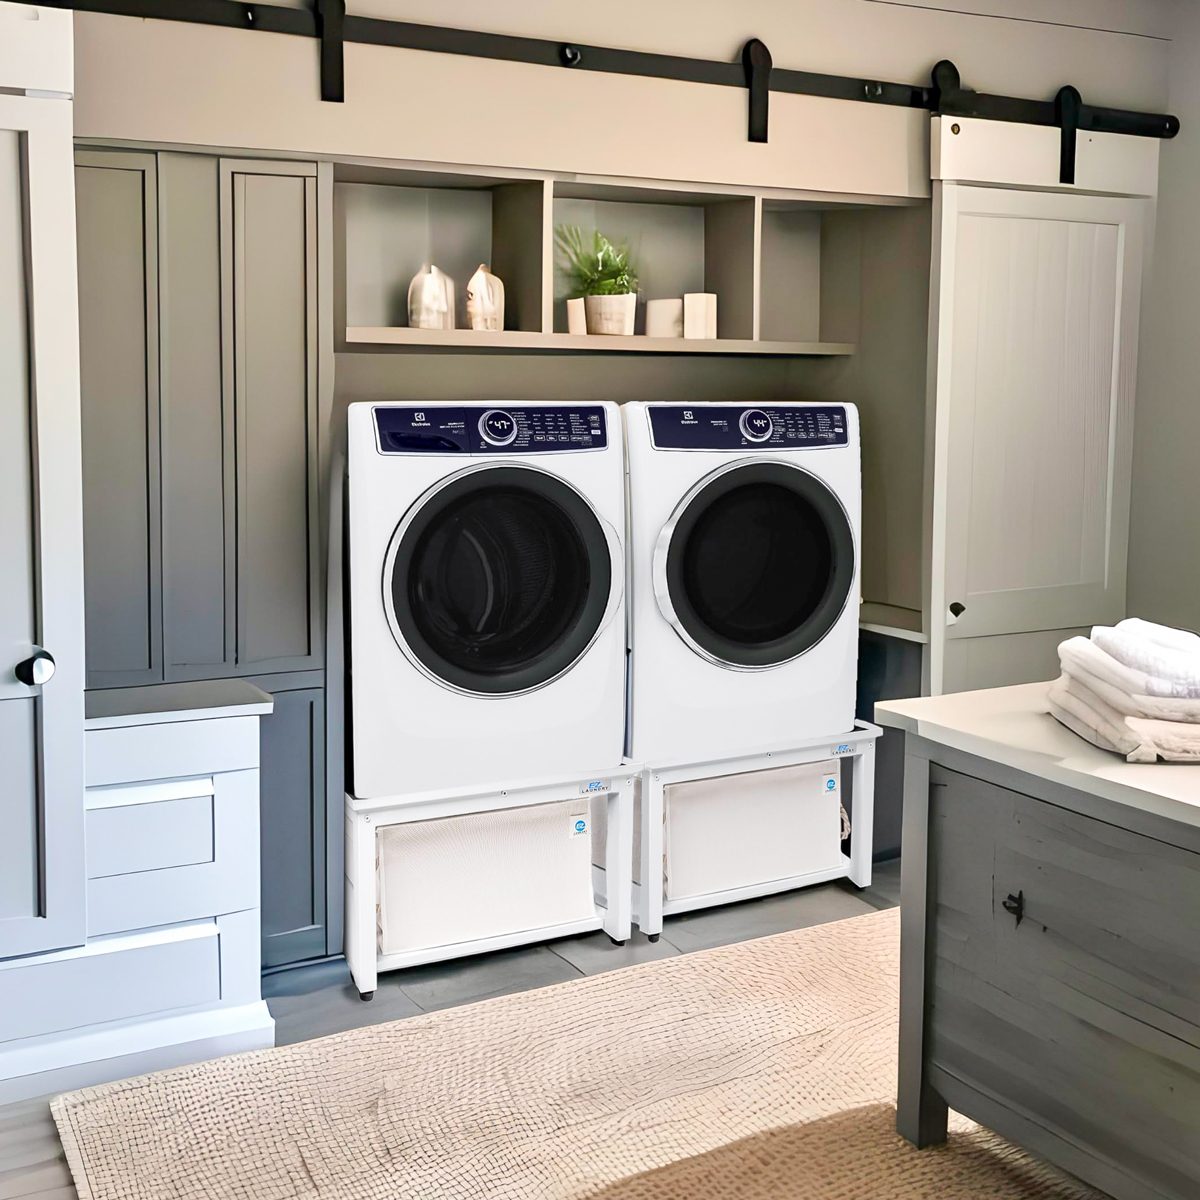 Washer & Dryer Pedestal | Made in The USA | This Is The Ultimate Solution for Laundry Room Organization | Designed for All Appliances & Popular